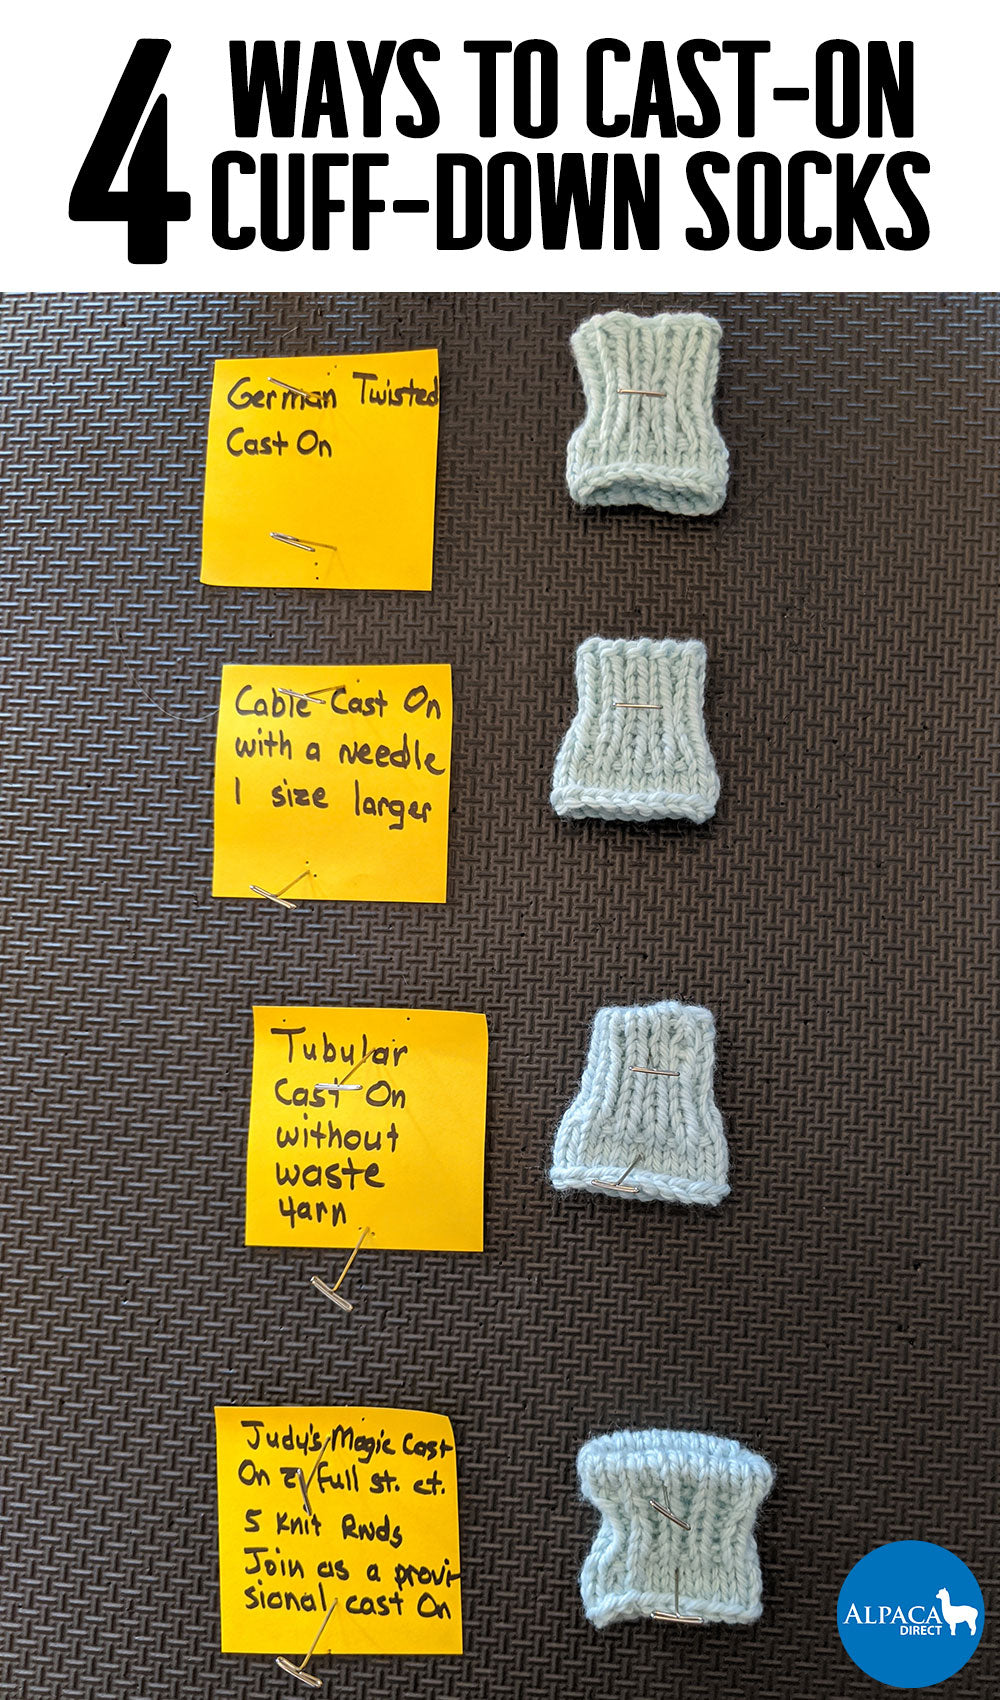 Photo of four different examples of ways to cast-on cuff-down socks.